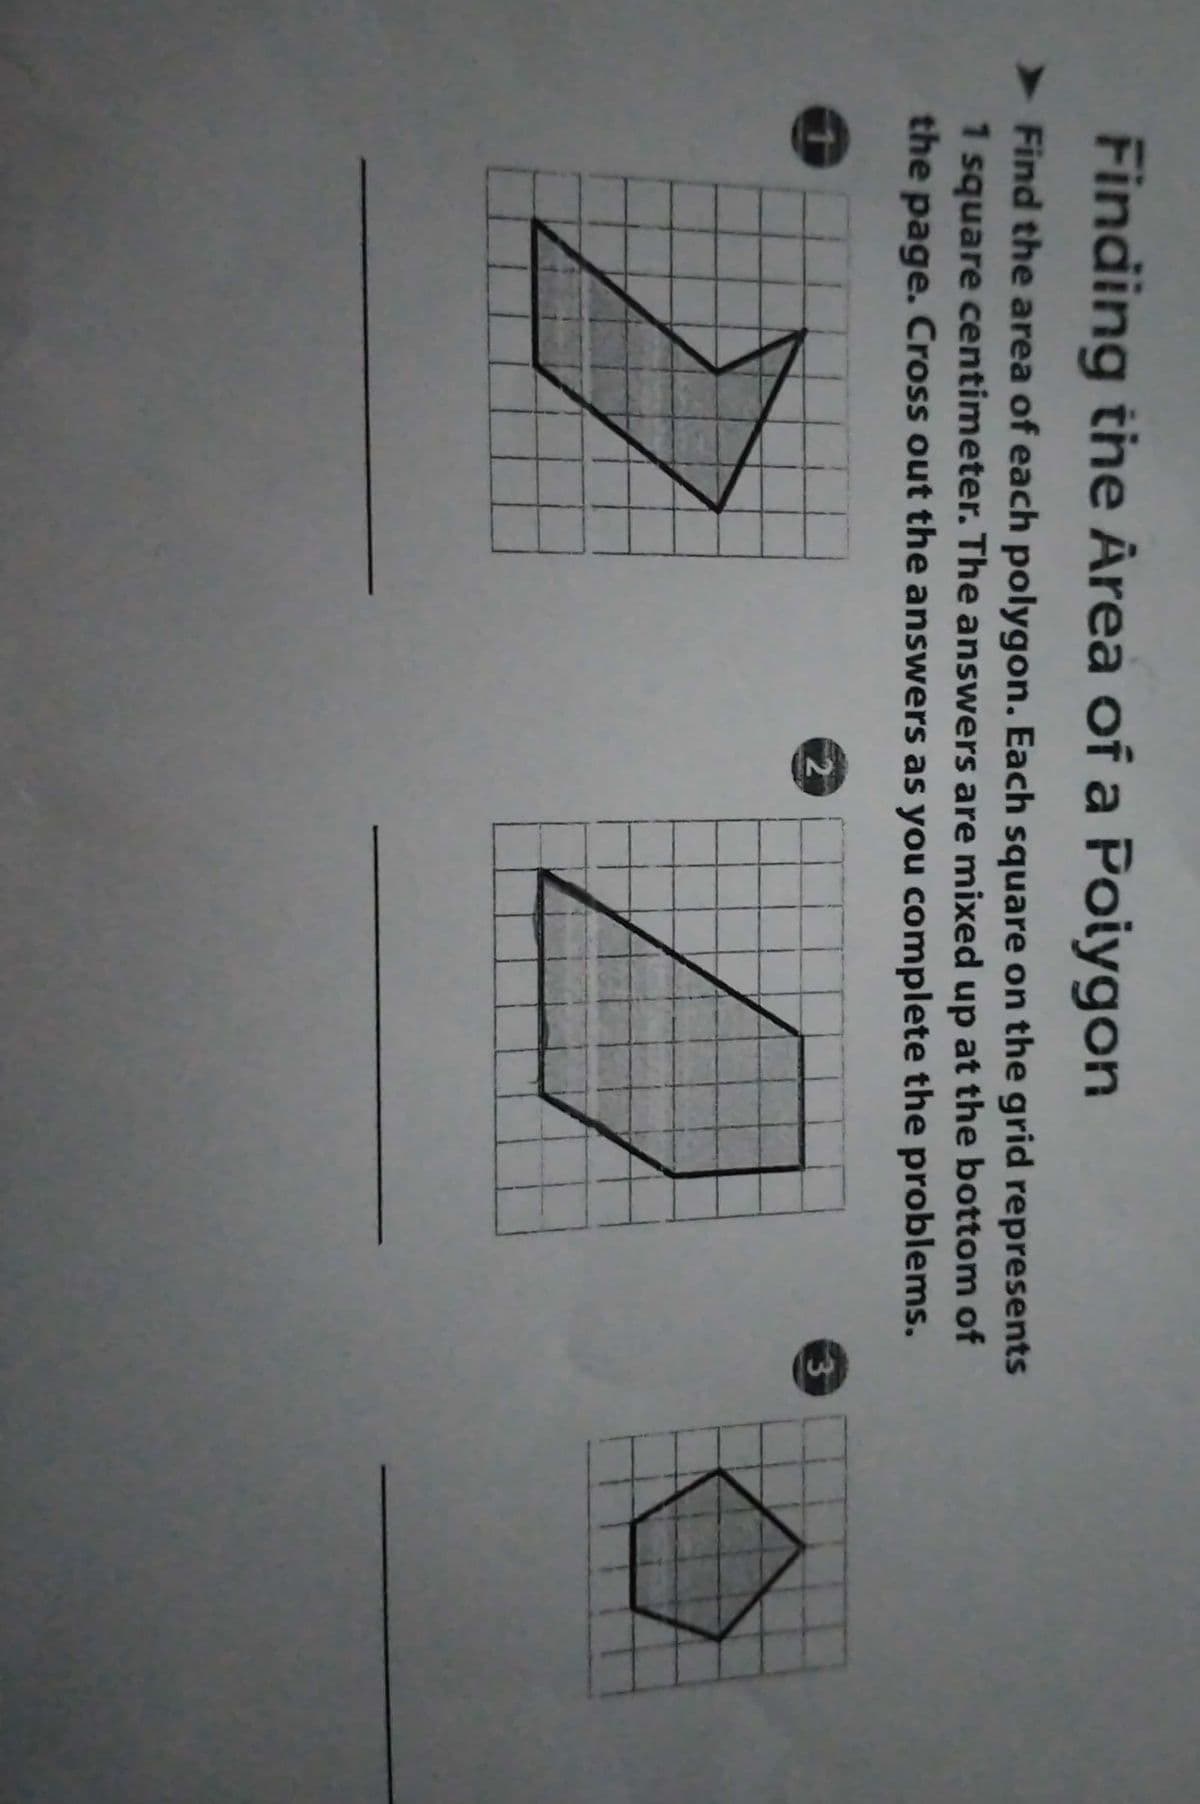 Finding the Årea of a Poiygon
> Find the area of each polygon. Each square on the grid represents
square centimeter. The answers are mixed up at the bottom of
the page. Cross out the answers as you complete the problems.
71
